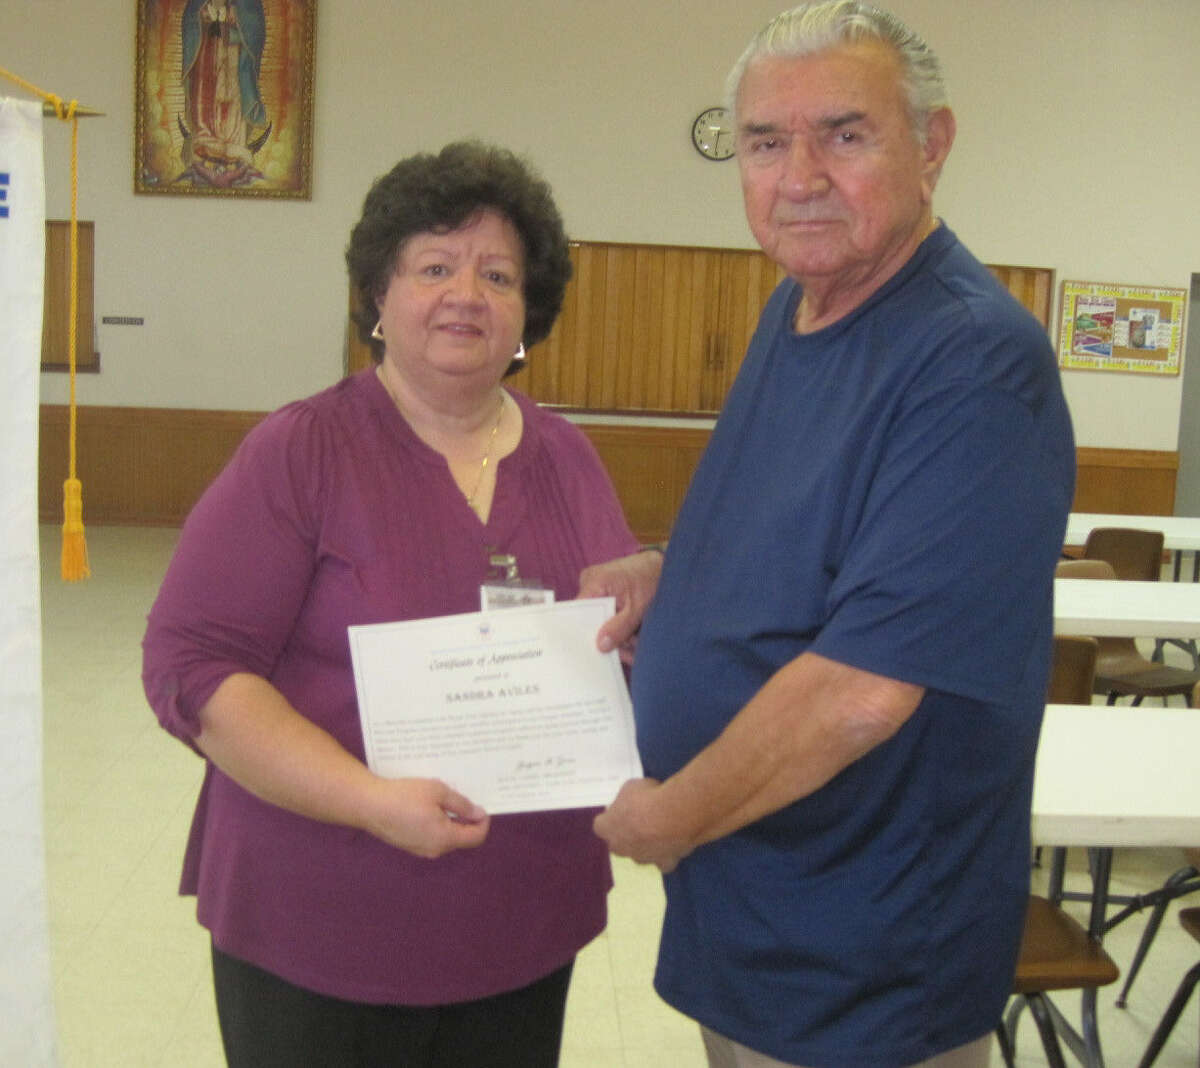 Sandra Aviles, the benefits counselor with the Bexar Area Agency on Aging, receives a certificate from veteran Abel Hernandez, a longtime member of the National Active and Retired Federal Employees association.